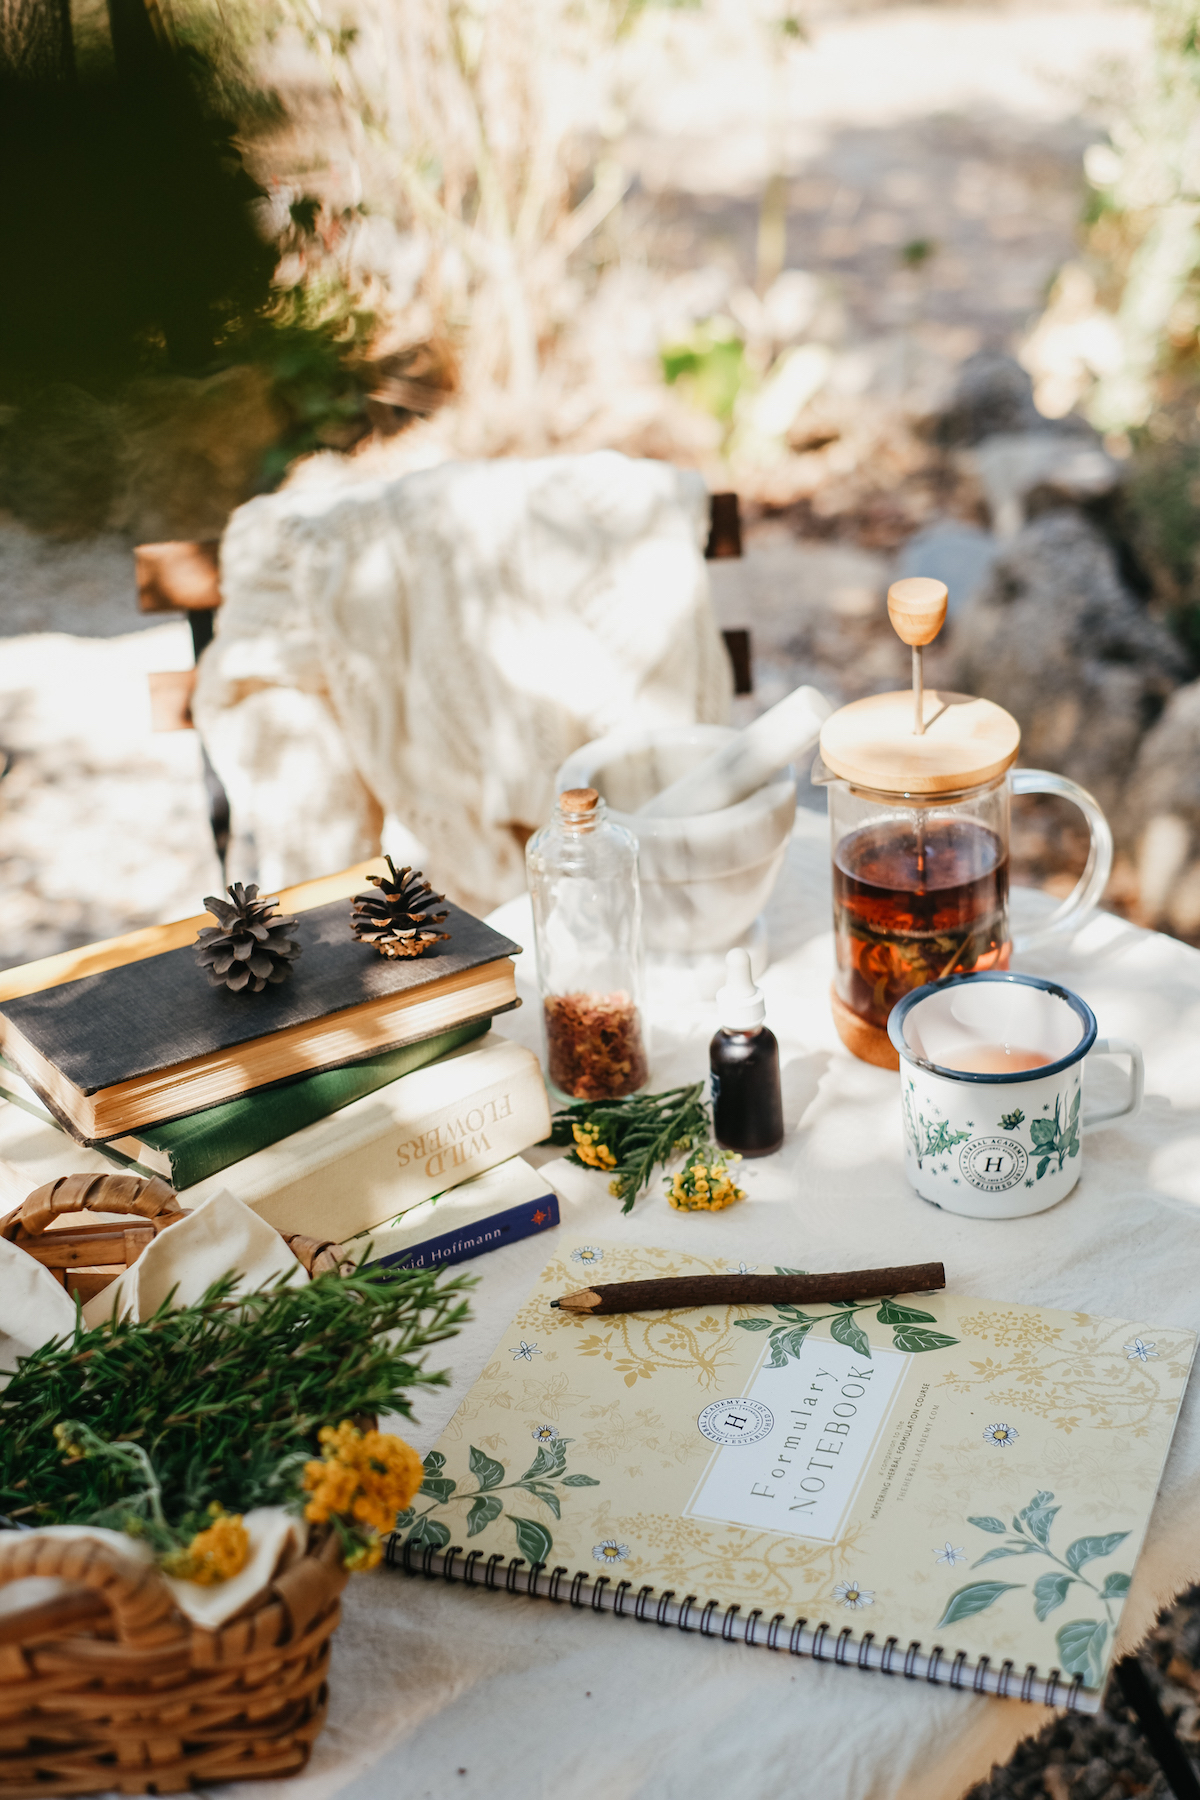 My Herbal Study Scene – develop your love for herbs AND your love for learning. Build confidence in your herbal studies in this Free Herbal Course by Herbal Academy!